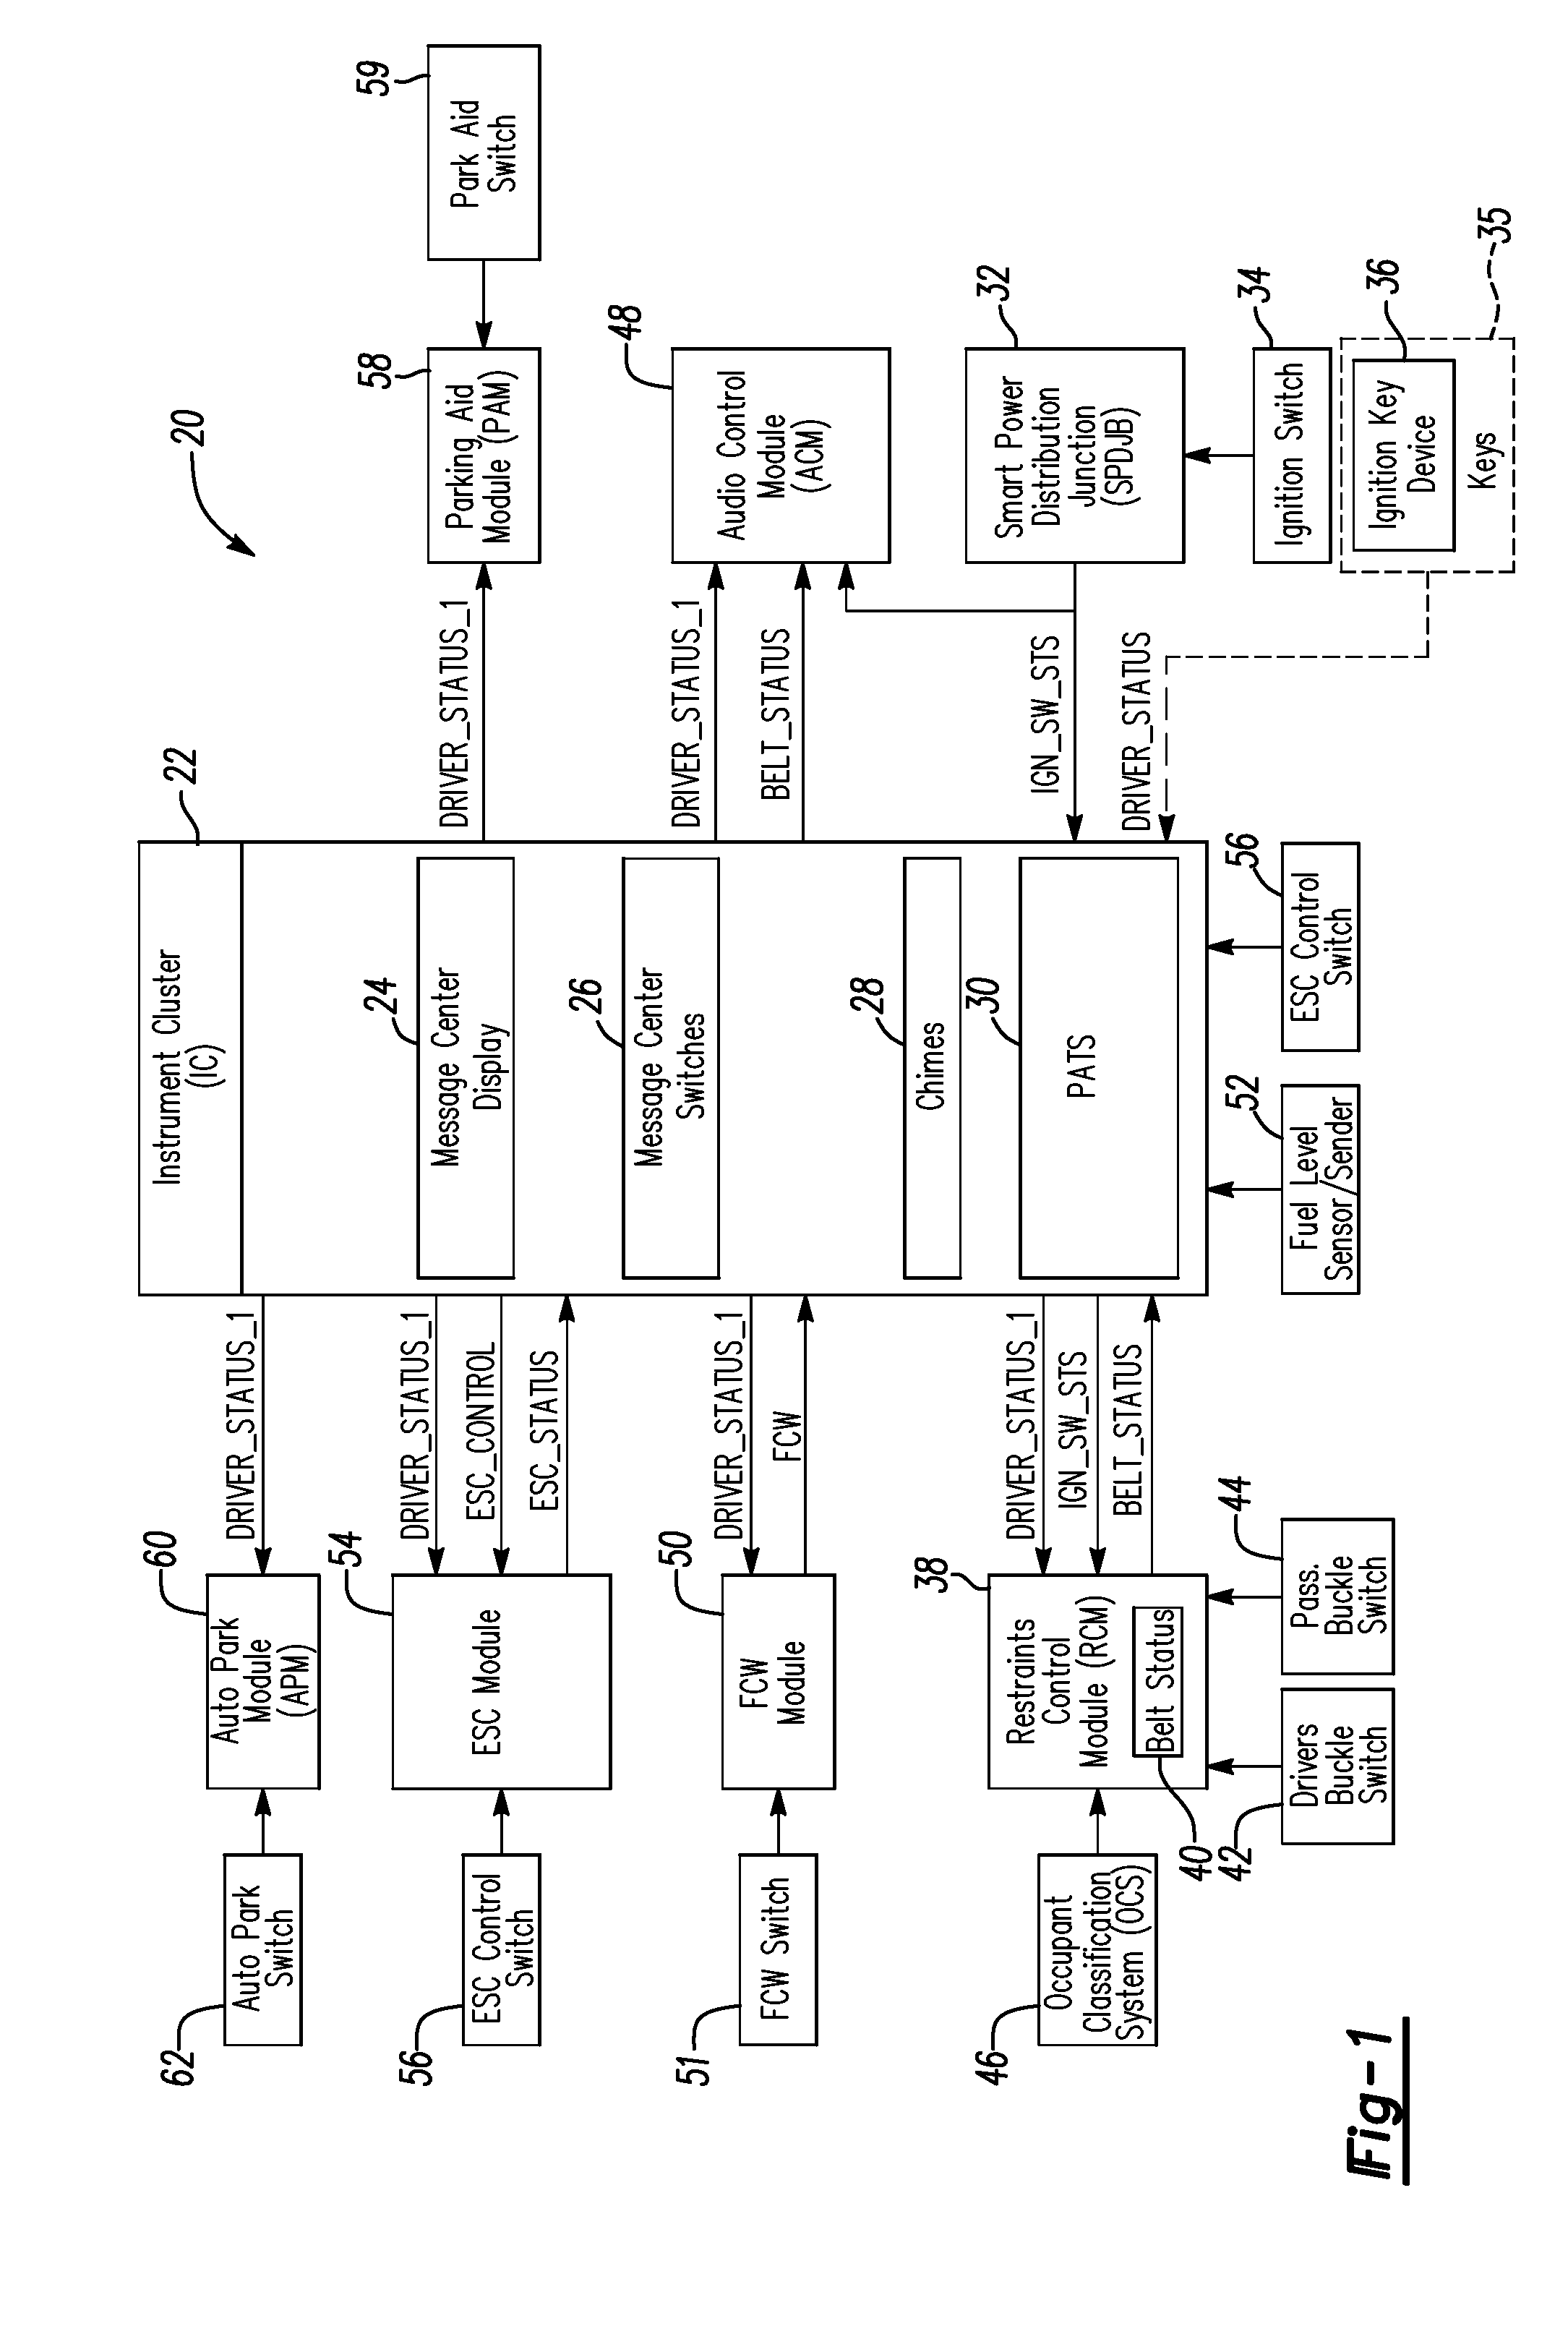 System and method for controlling a safety restraint status based on driver status